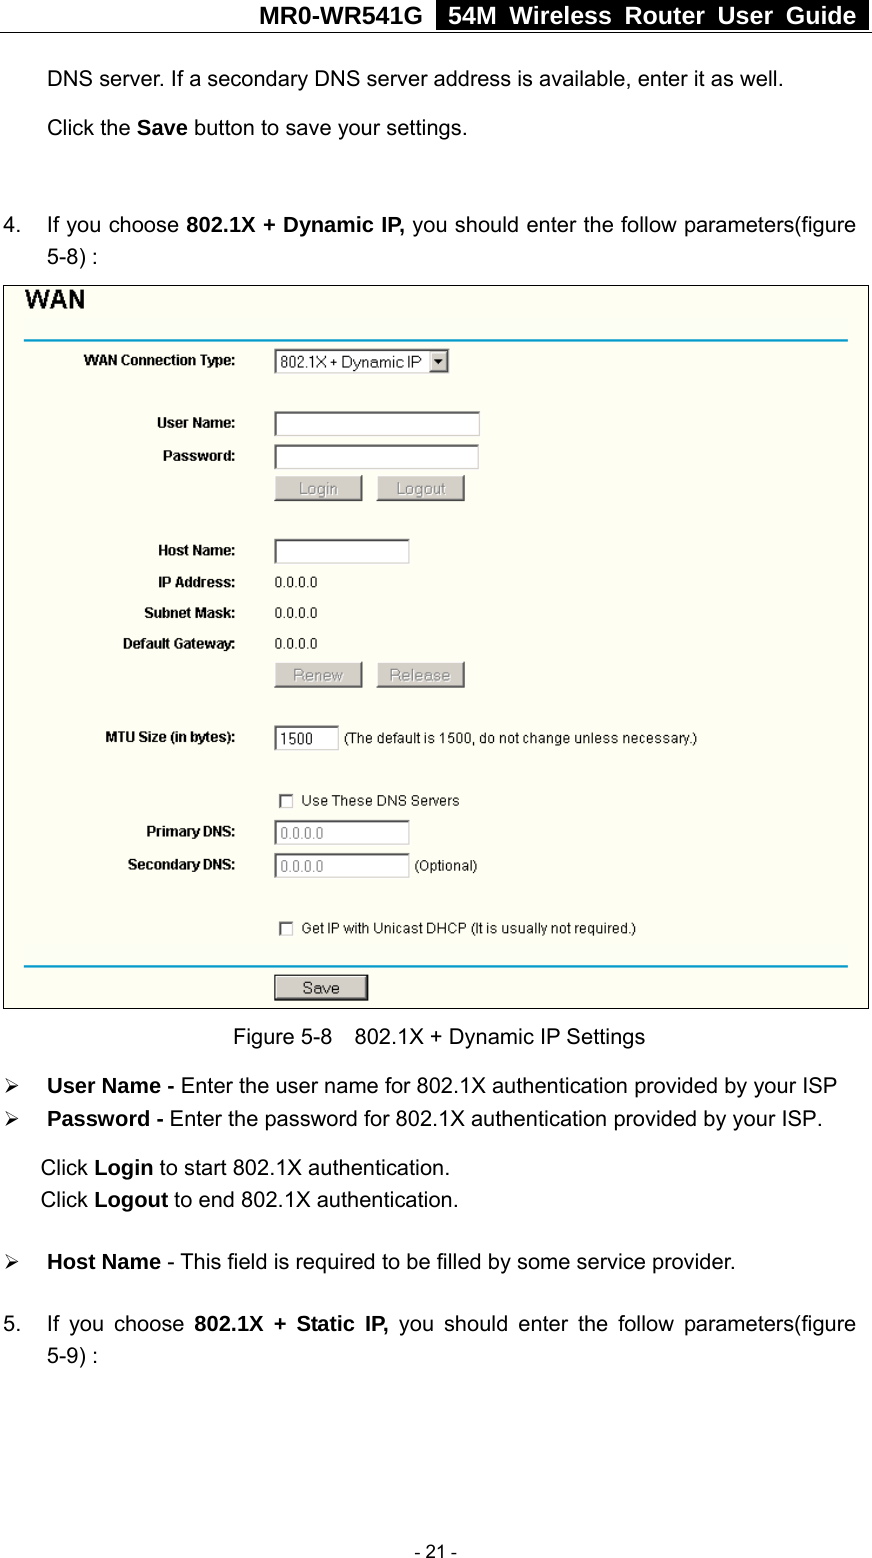 MR0-WR541G   54M Wireless Router User Guide  DNS server. If a secondary DNS server address is available, enter it as well. Click the Save button to save your settings.  4.  If you choose 802.1X + Dynamic IP, you should enter the follow parameters(figure 5-8) :  Figure 5-8    802.1X + Dynamic IP Settings ¾ User Name - Enter the user name for 802.1X authentication provided by your ISP ¾ Password - Enter the password for 802.1X authentication provided by your ISP. Click Login to start 802.1X authentication. Click Logout to end 802.1X authentication. ¾ Host Name - This field is required to be filled by some service provider. 5.  If you choose 802.1X + Static IP, you should enter the follow parameters(figure 5-9) :  - 21 - 